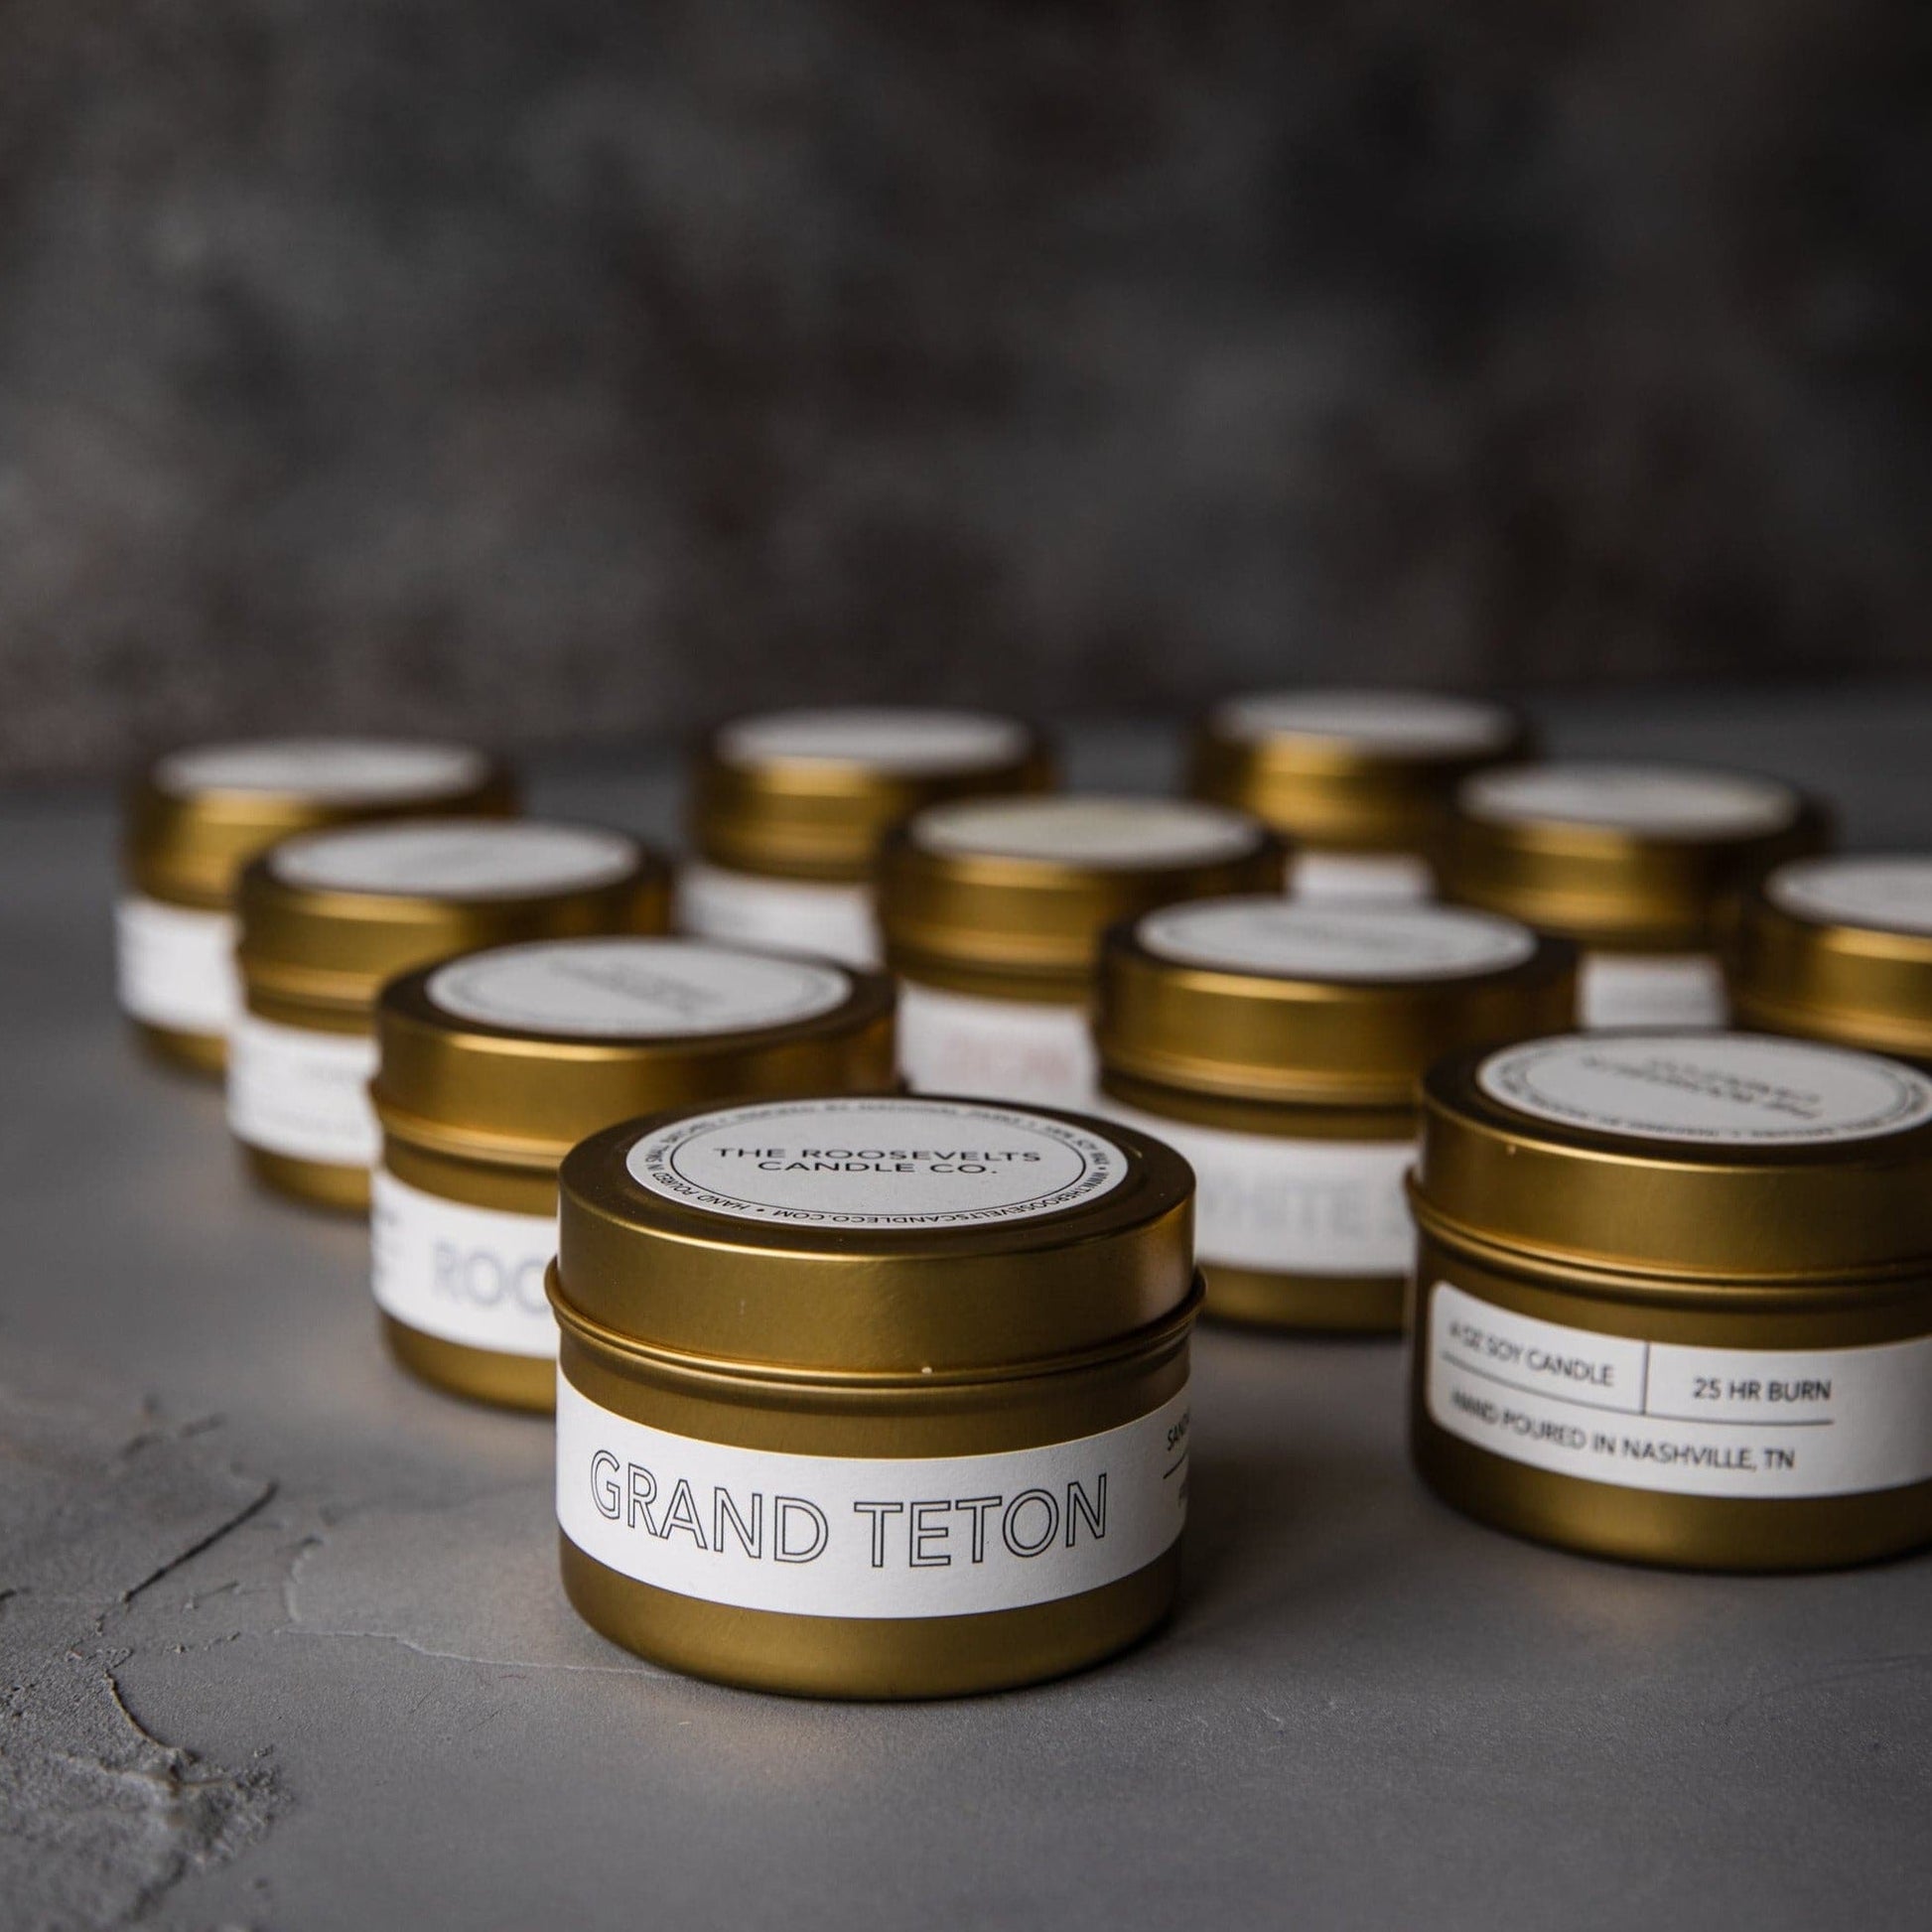 Grand Teton Travel Candle - The Roosevelts Candle Co.